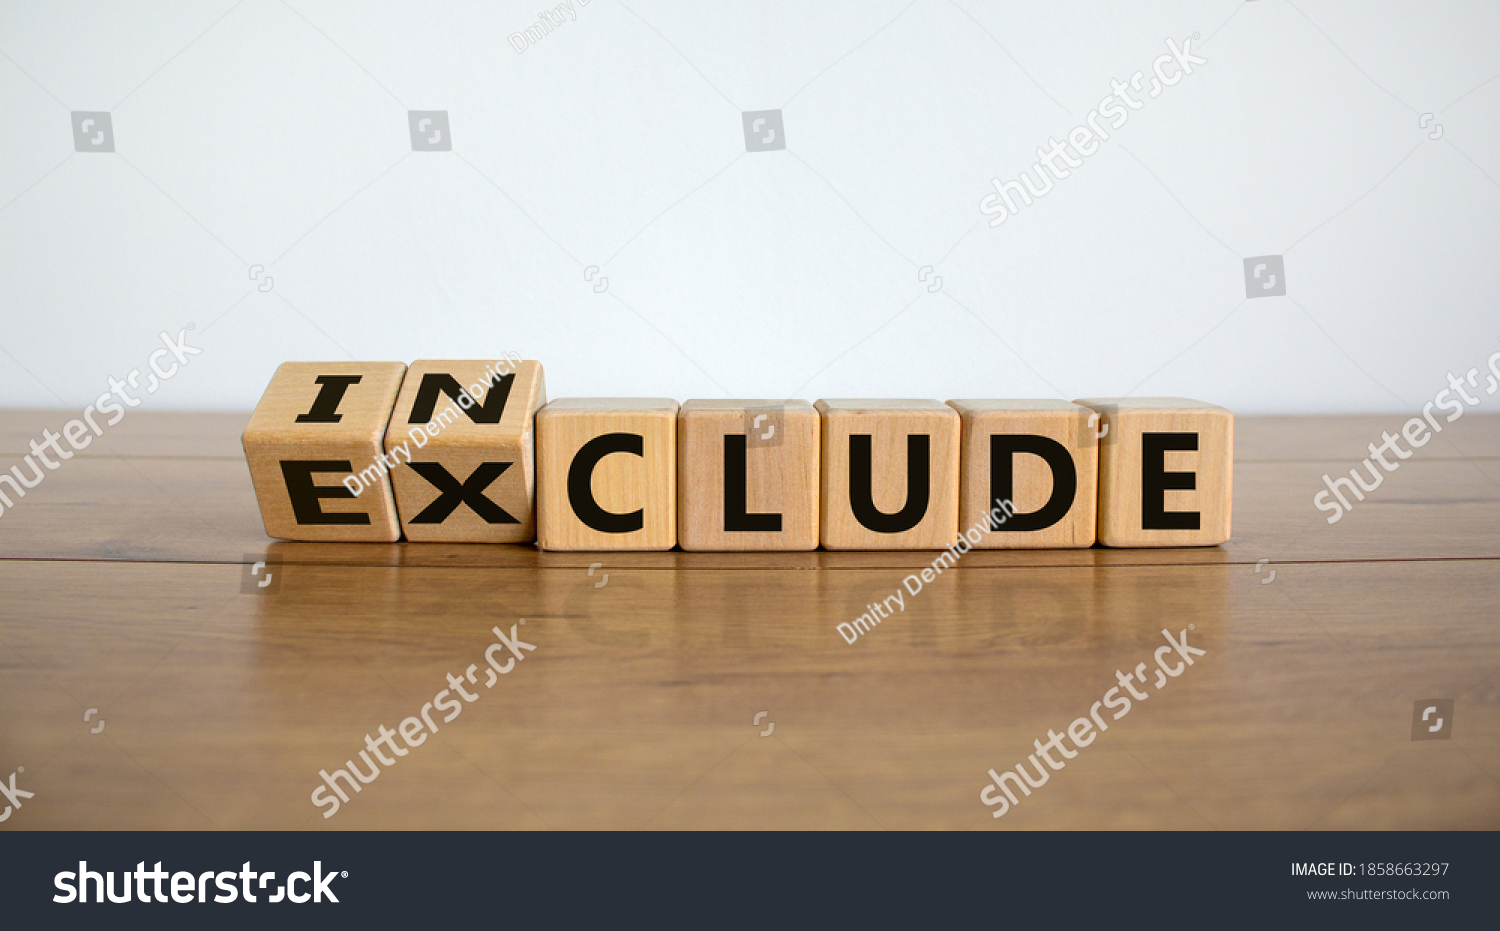 Symbol for a better inclusion. Inverted cube and changed word exclude to include. Beautiful wooden table, white background. Copy space. #1858663297